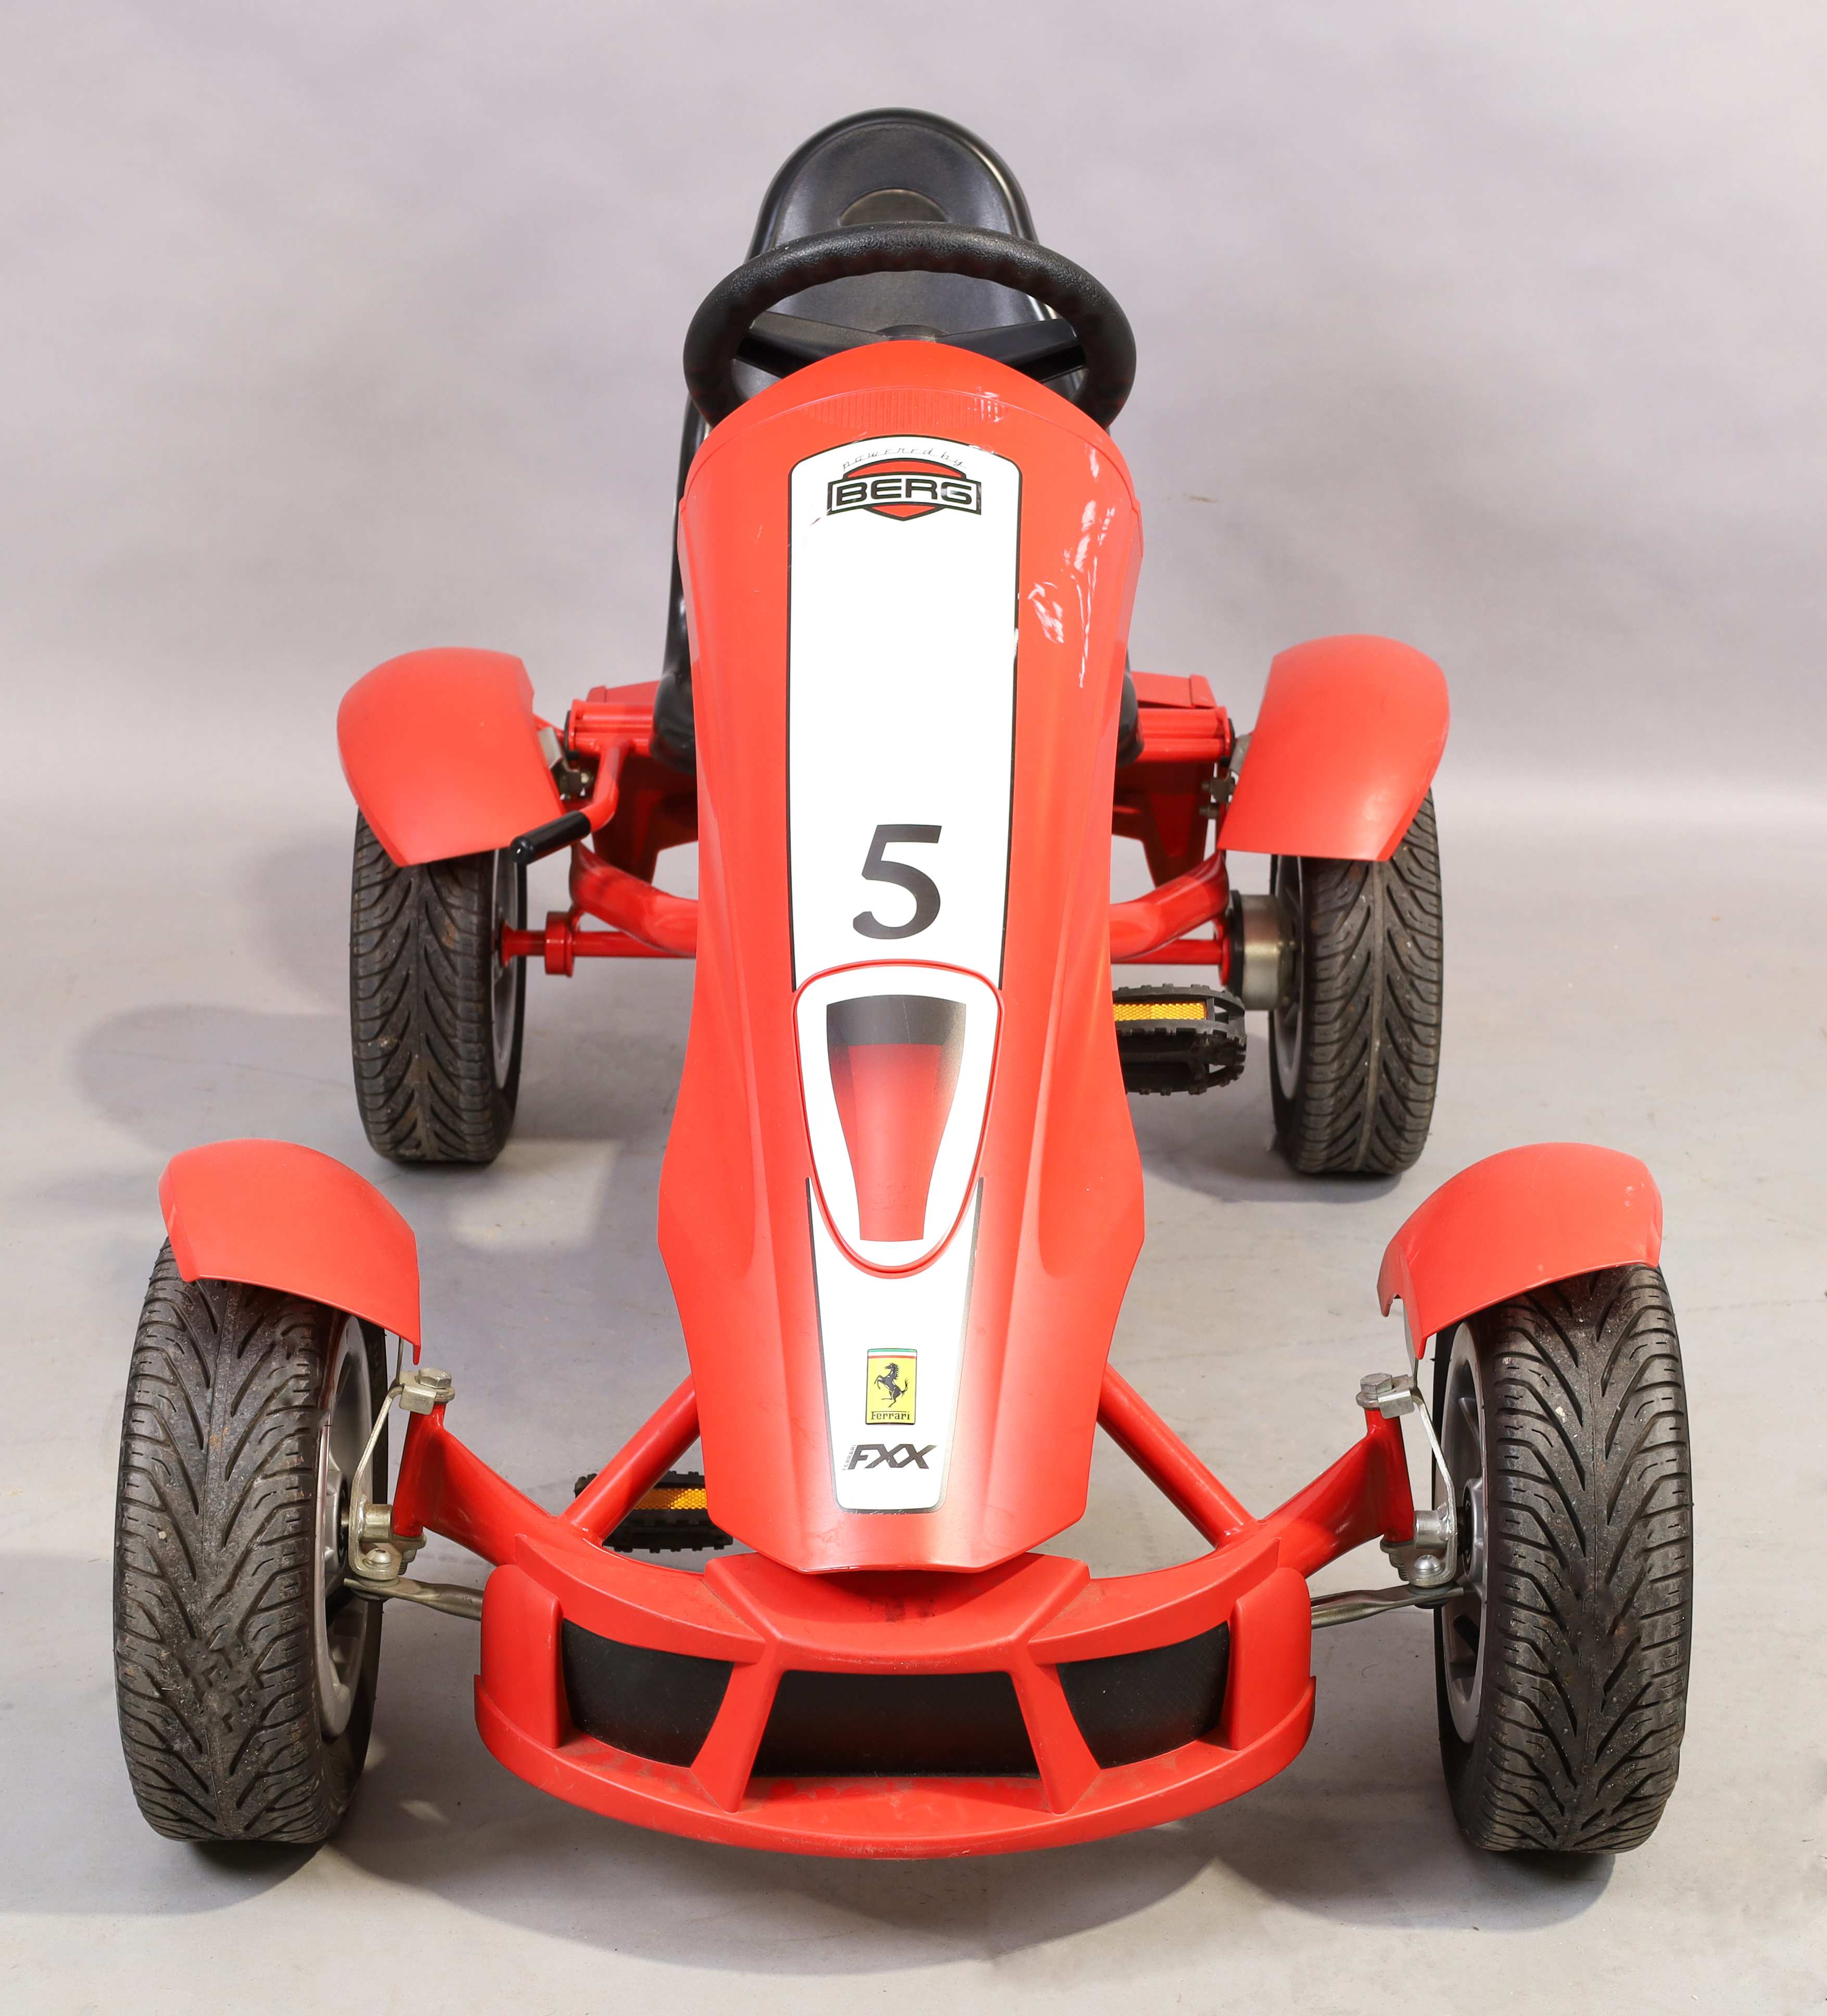 A Ferrari FXX pedal car by Berg toys Provenance: Property From the Collection of Kartika Soekarno - Image 2 of 2